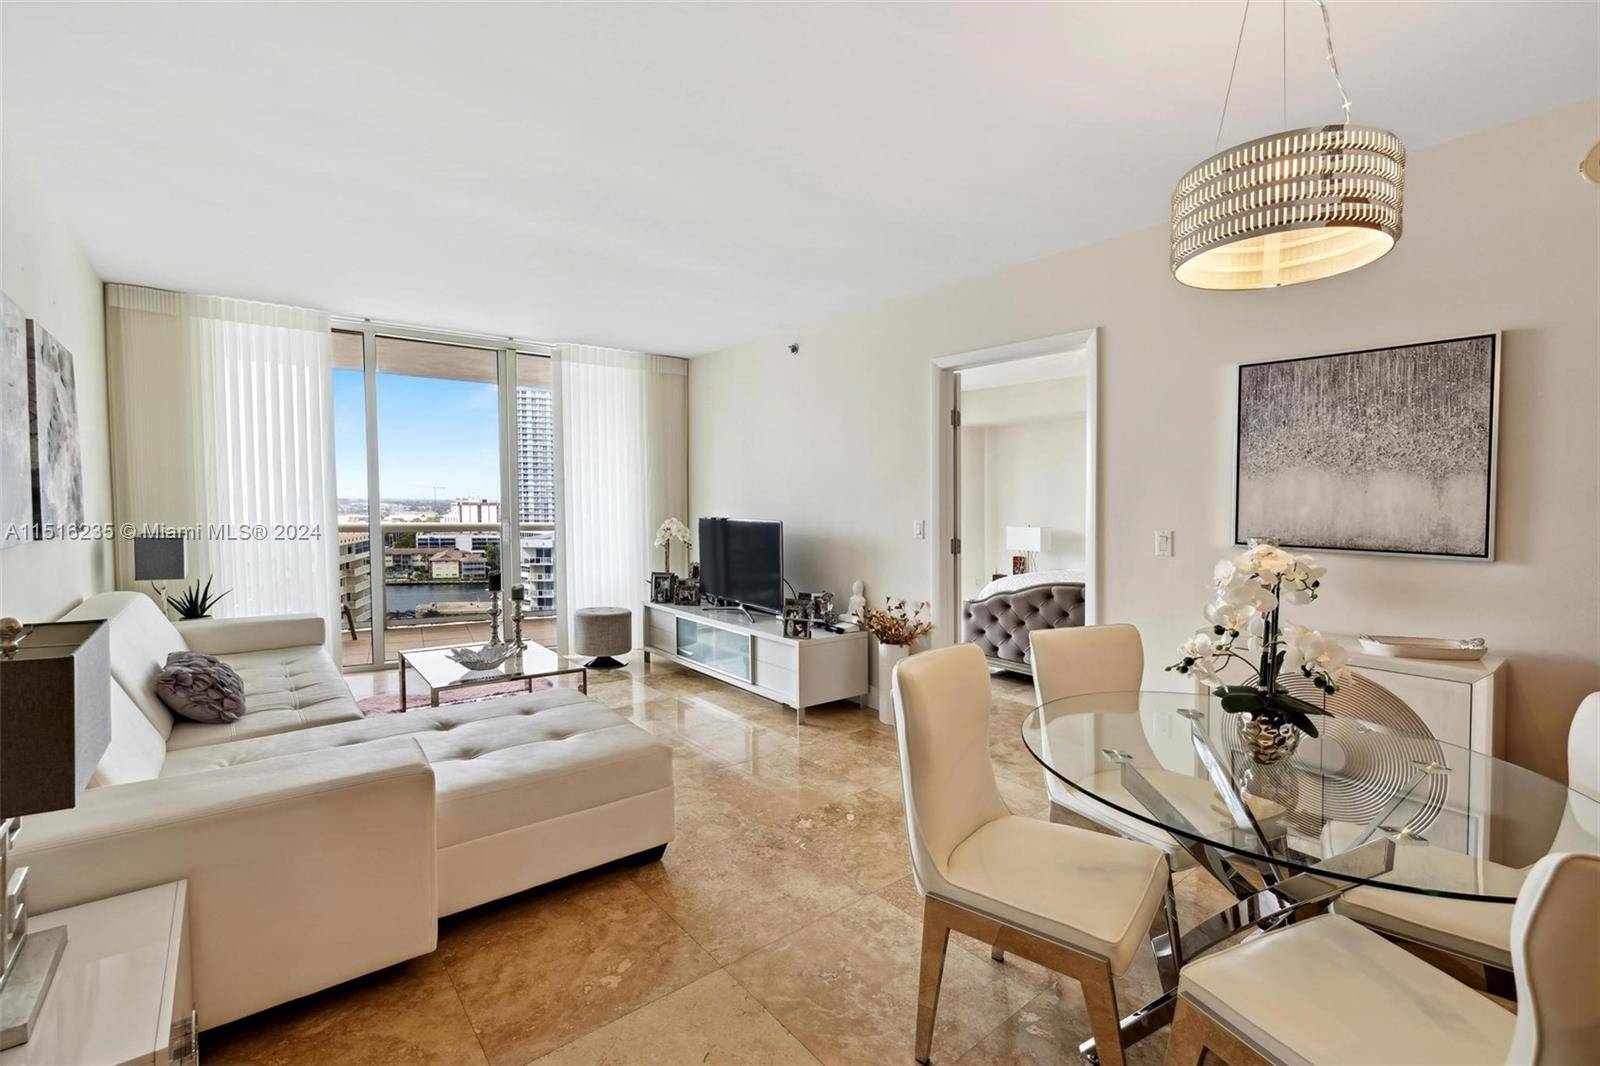 Breathtaking Intracoastal and city views await you from this 1 bed plus den 1 bath, 1, 086 Sq.